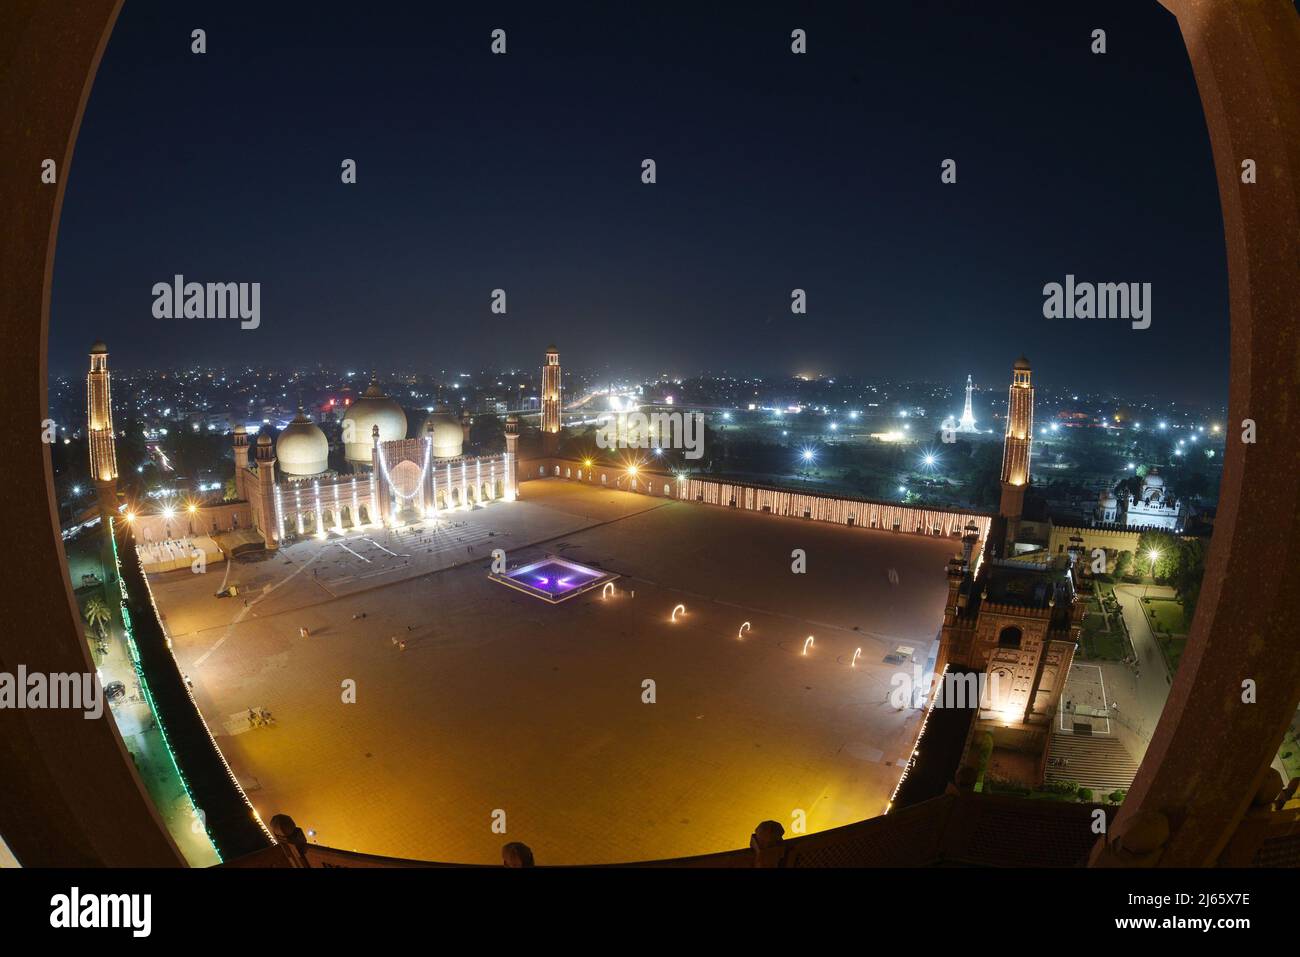 An attractive splendid stunning aerial view of historical Mughal Era Badshahi mosque decorated with lights to mark the holy night and seek divine blessings of Lailatul Qadr, also known as the Night of Power in Lahore. Laylat ul Qadr or commonly known as Shab-e-Qadr, the ‘Night of Power' is full of blessings because the eminent Quran descended in it, Muslim worshipers arrive to offer evening prayers 27th night of the Holy month of Ramadan at an illuminated Badshahi Mosque' according to tradition, when the Muslim holy book, the Koran, was revealed to the Prophet Mohammed through the angel Gabrie Stock Photo